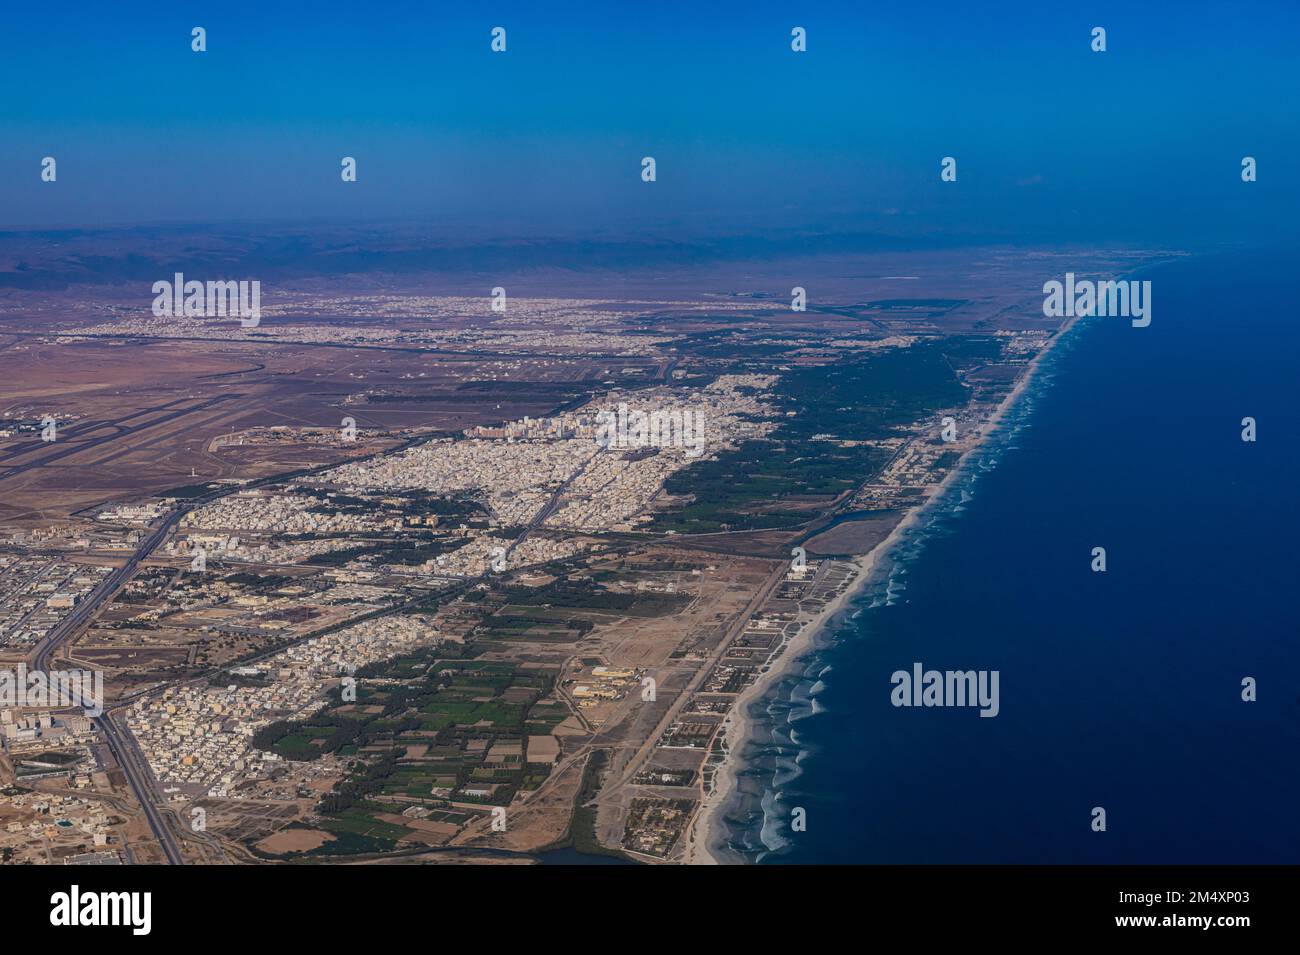 Oman, Dhofar Governorate, Salalah, Aerial view of desert city and coastline of Persian Gulf Stock Photo